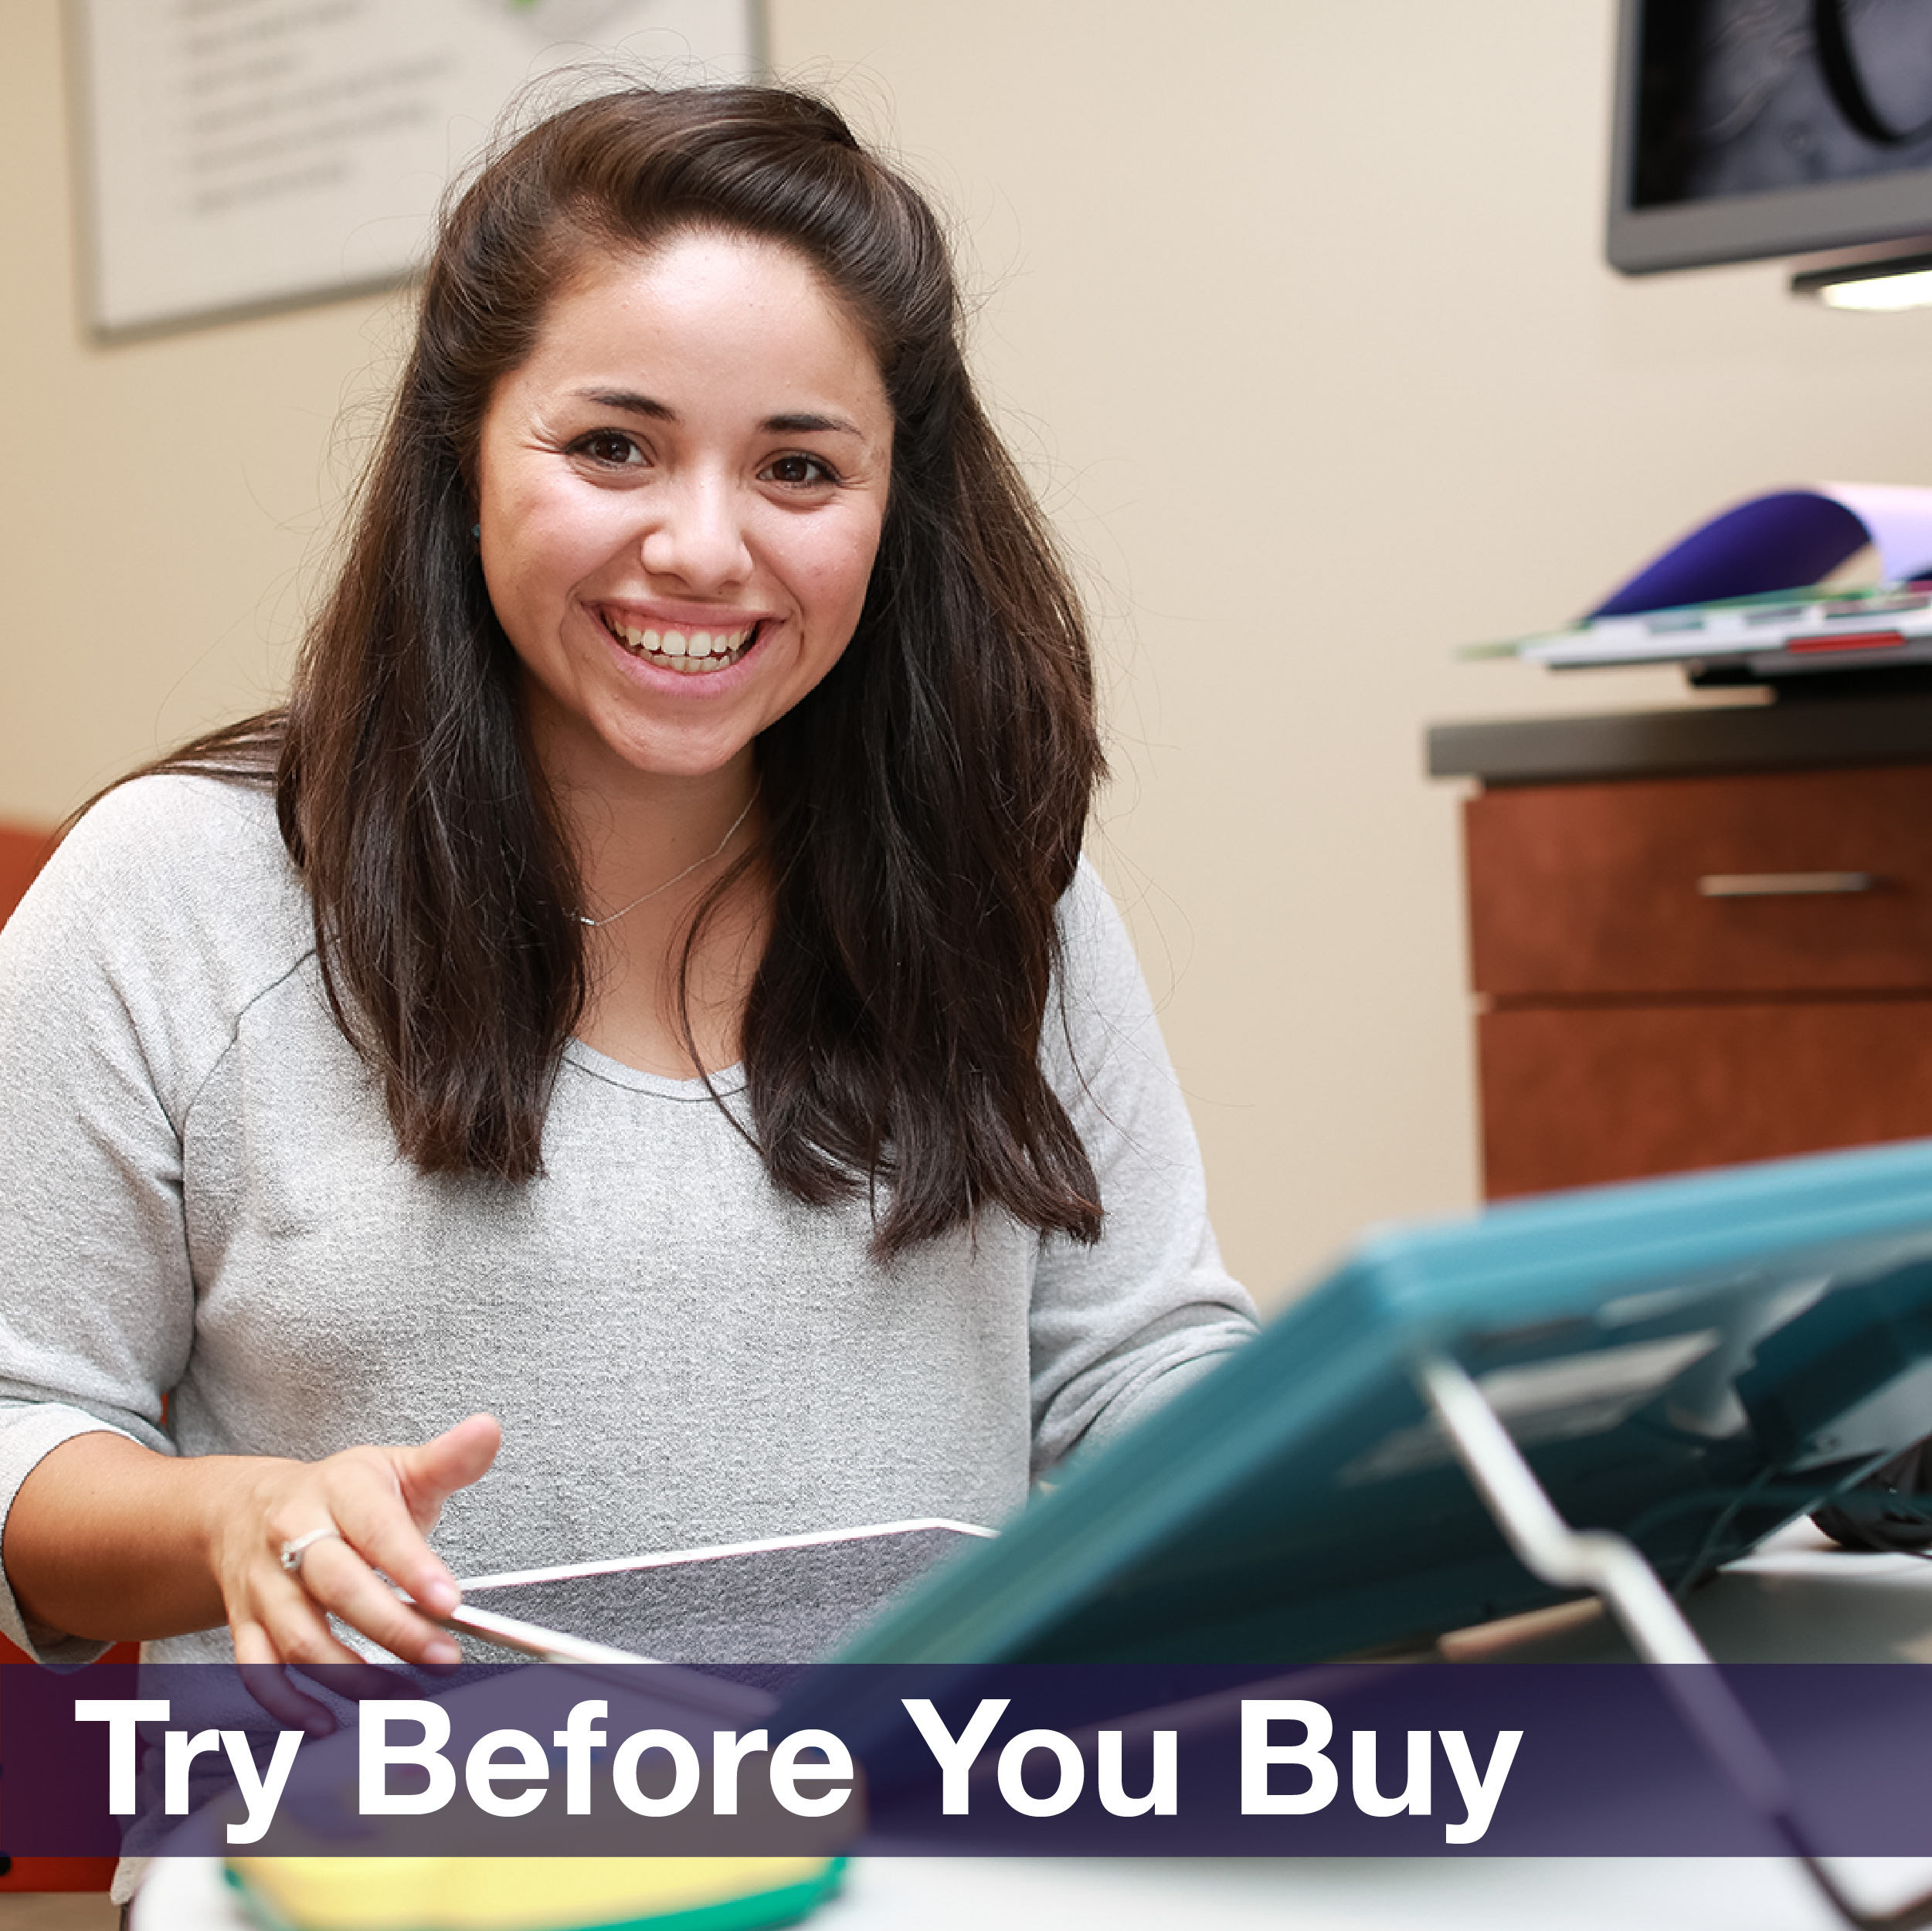 A young woman smiling and using a tablet, accompanied by the phrase “Try before you buy”